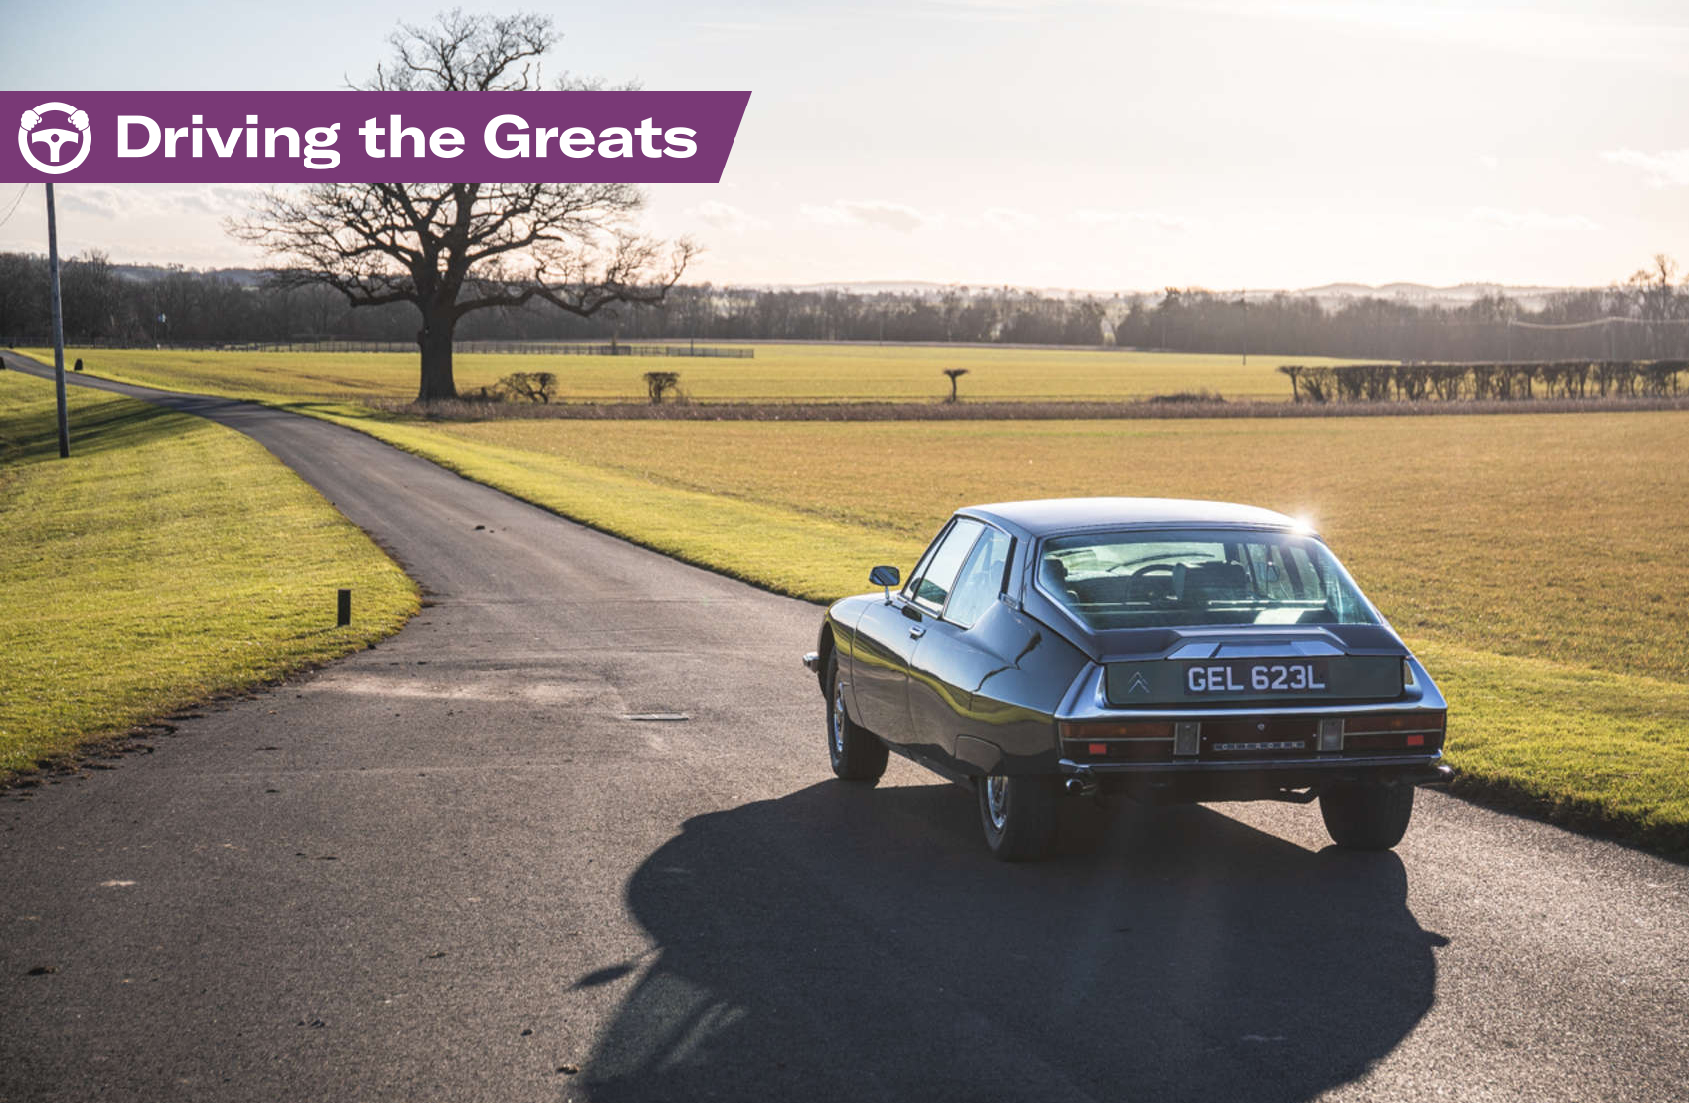 Driving the Greats: A Citroën SM is one of life's great pleasures